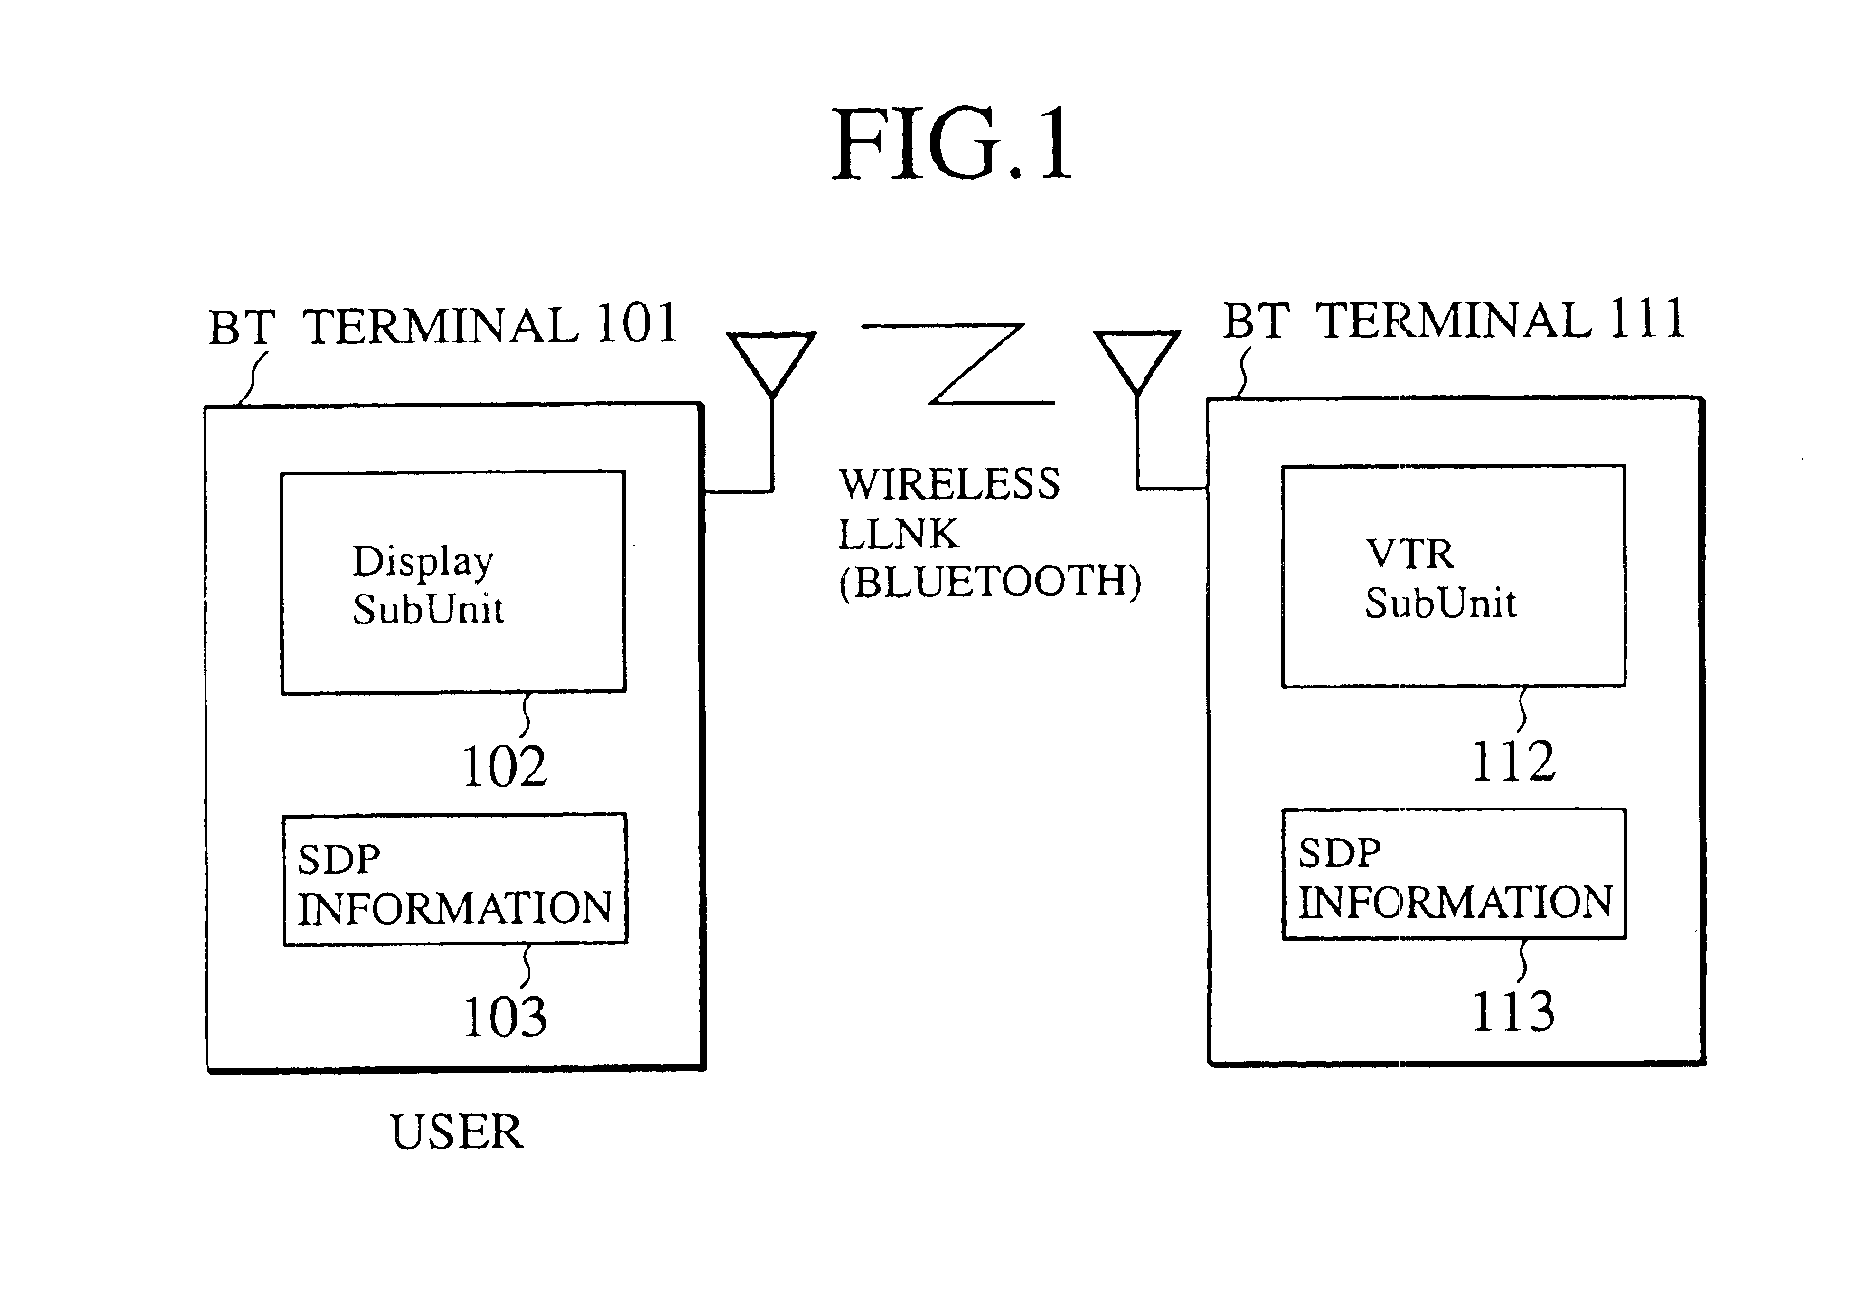 Method and device for facilitating efficient data transfer via a wireless communication network